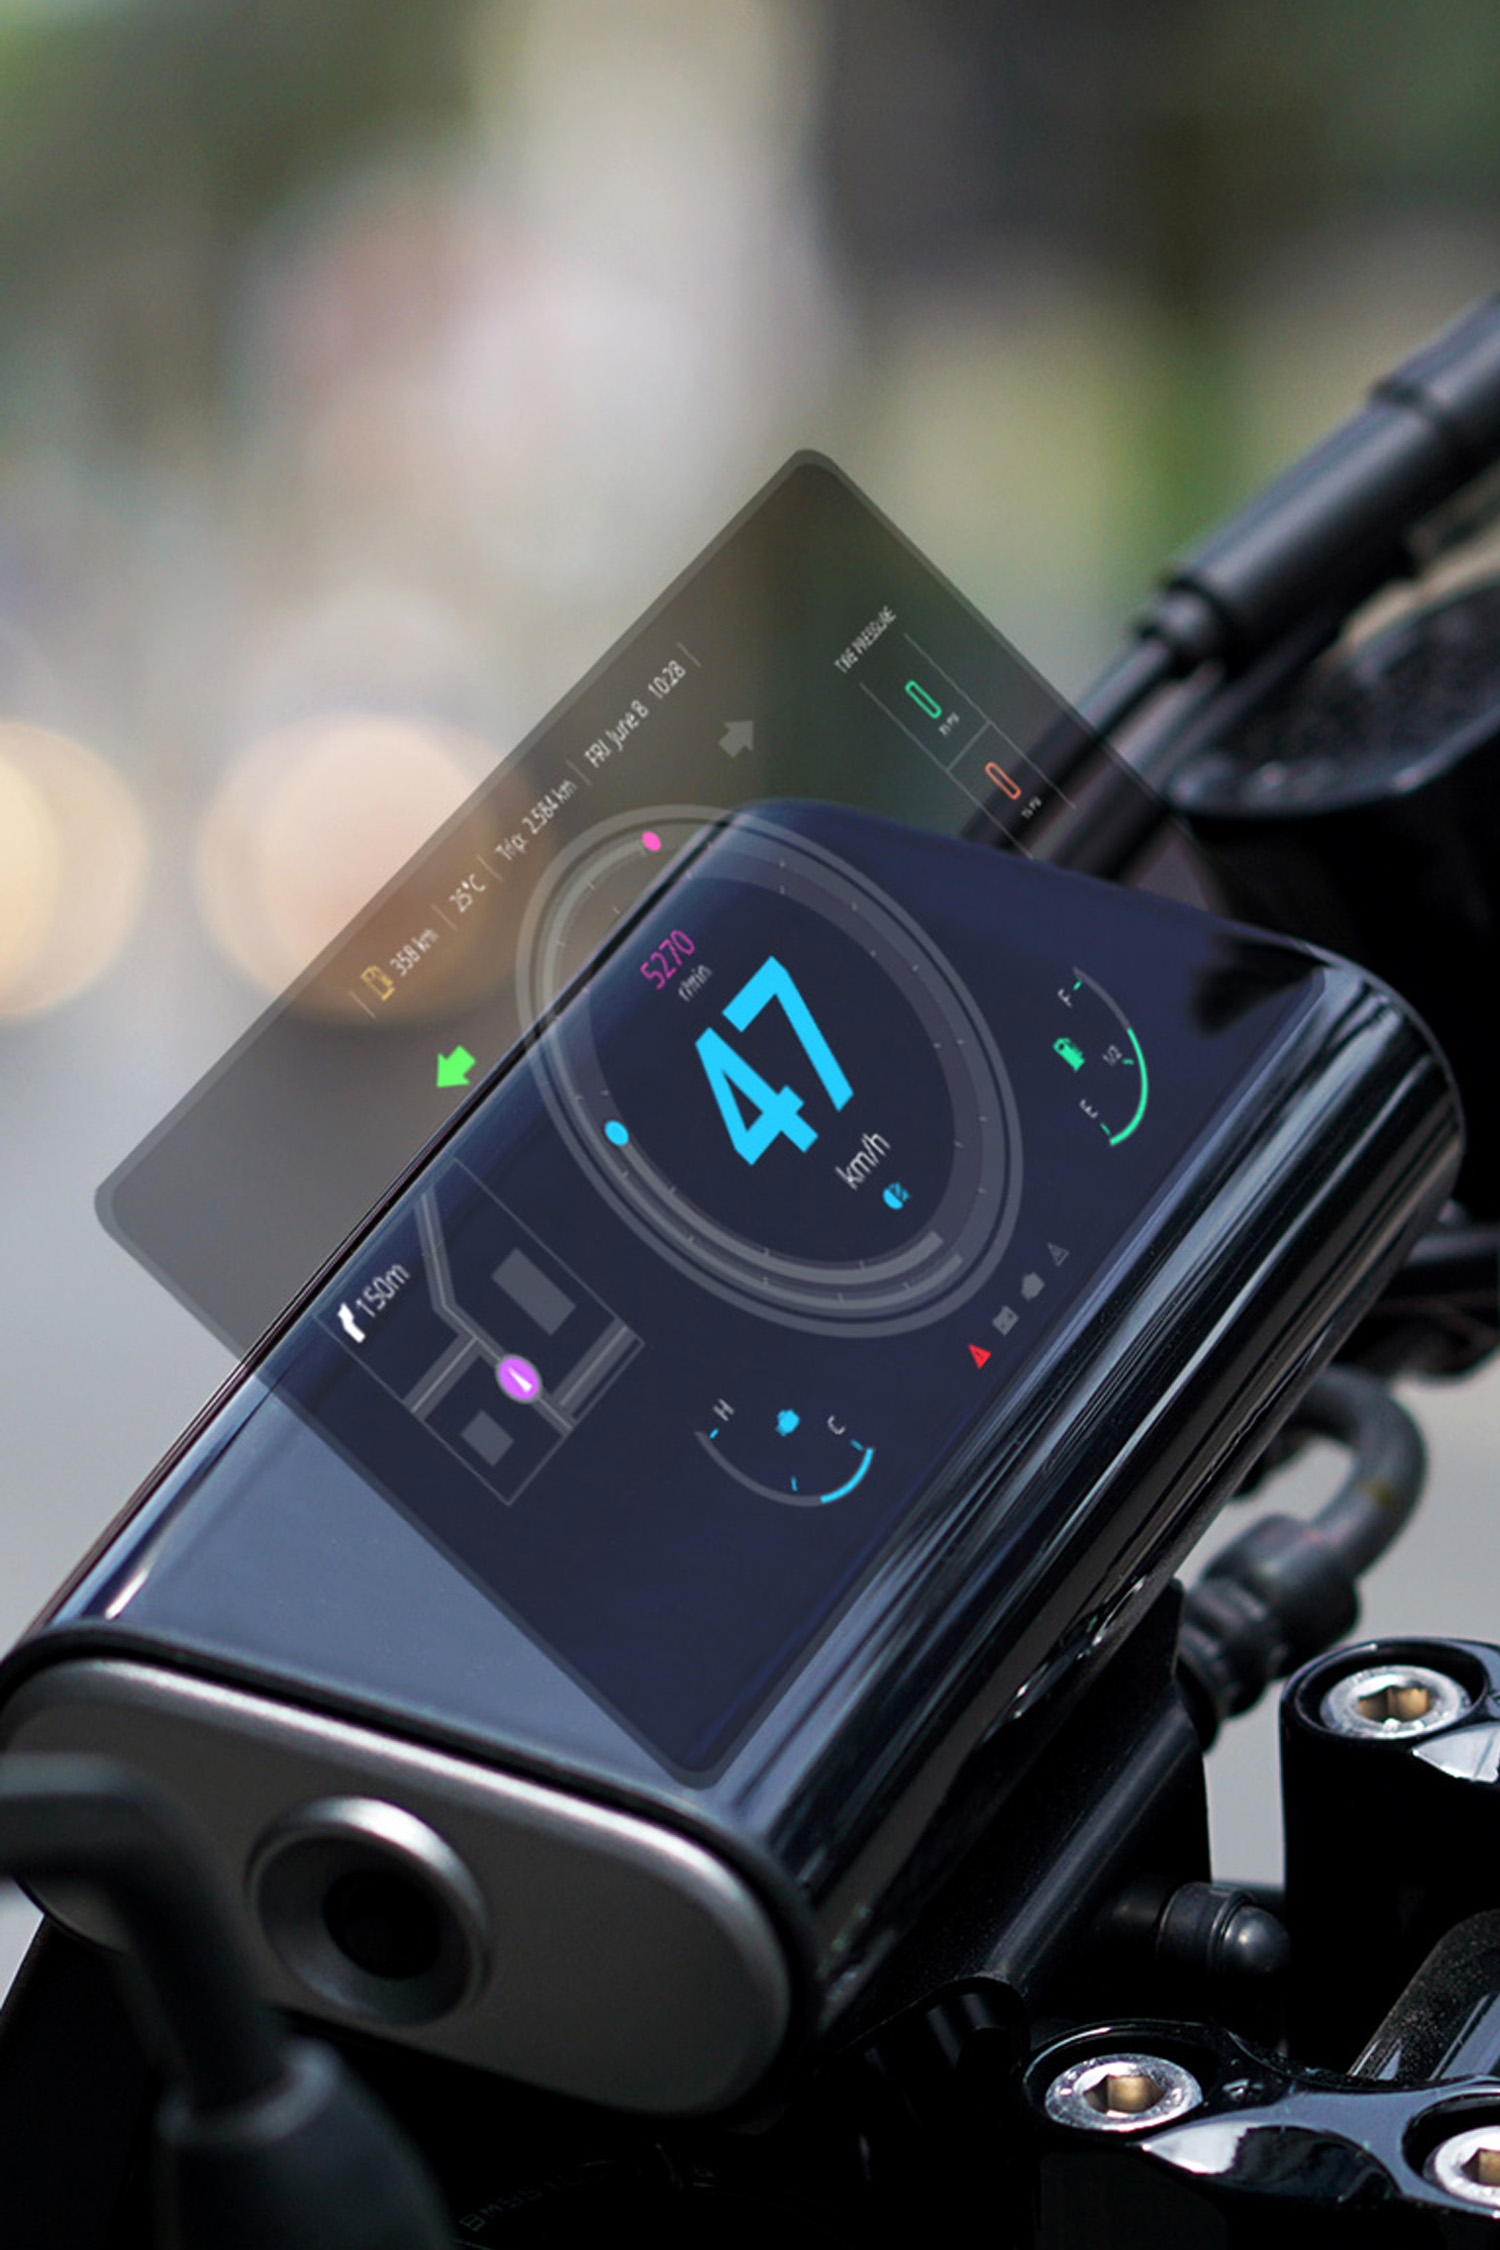 Application of Holos projection to Motorcycle Instrument Panel